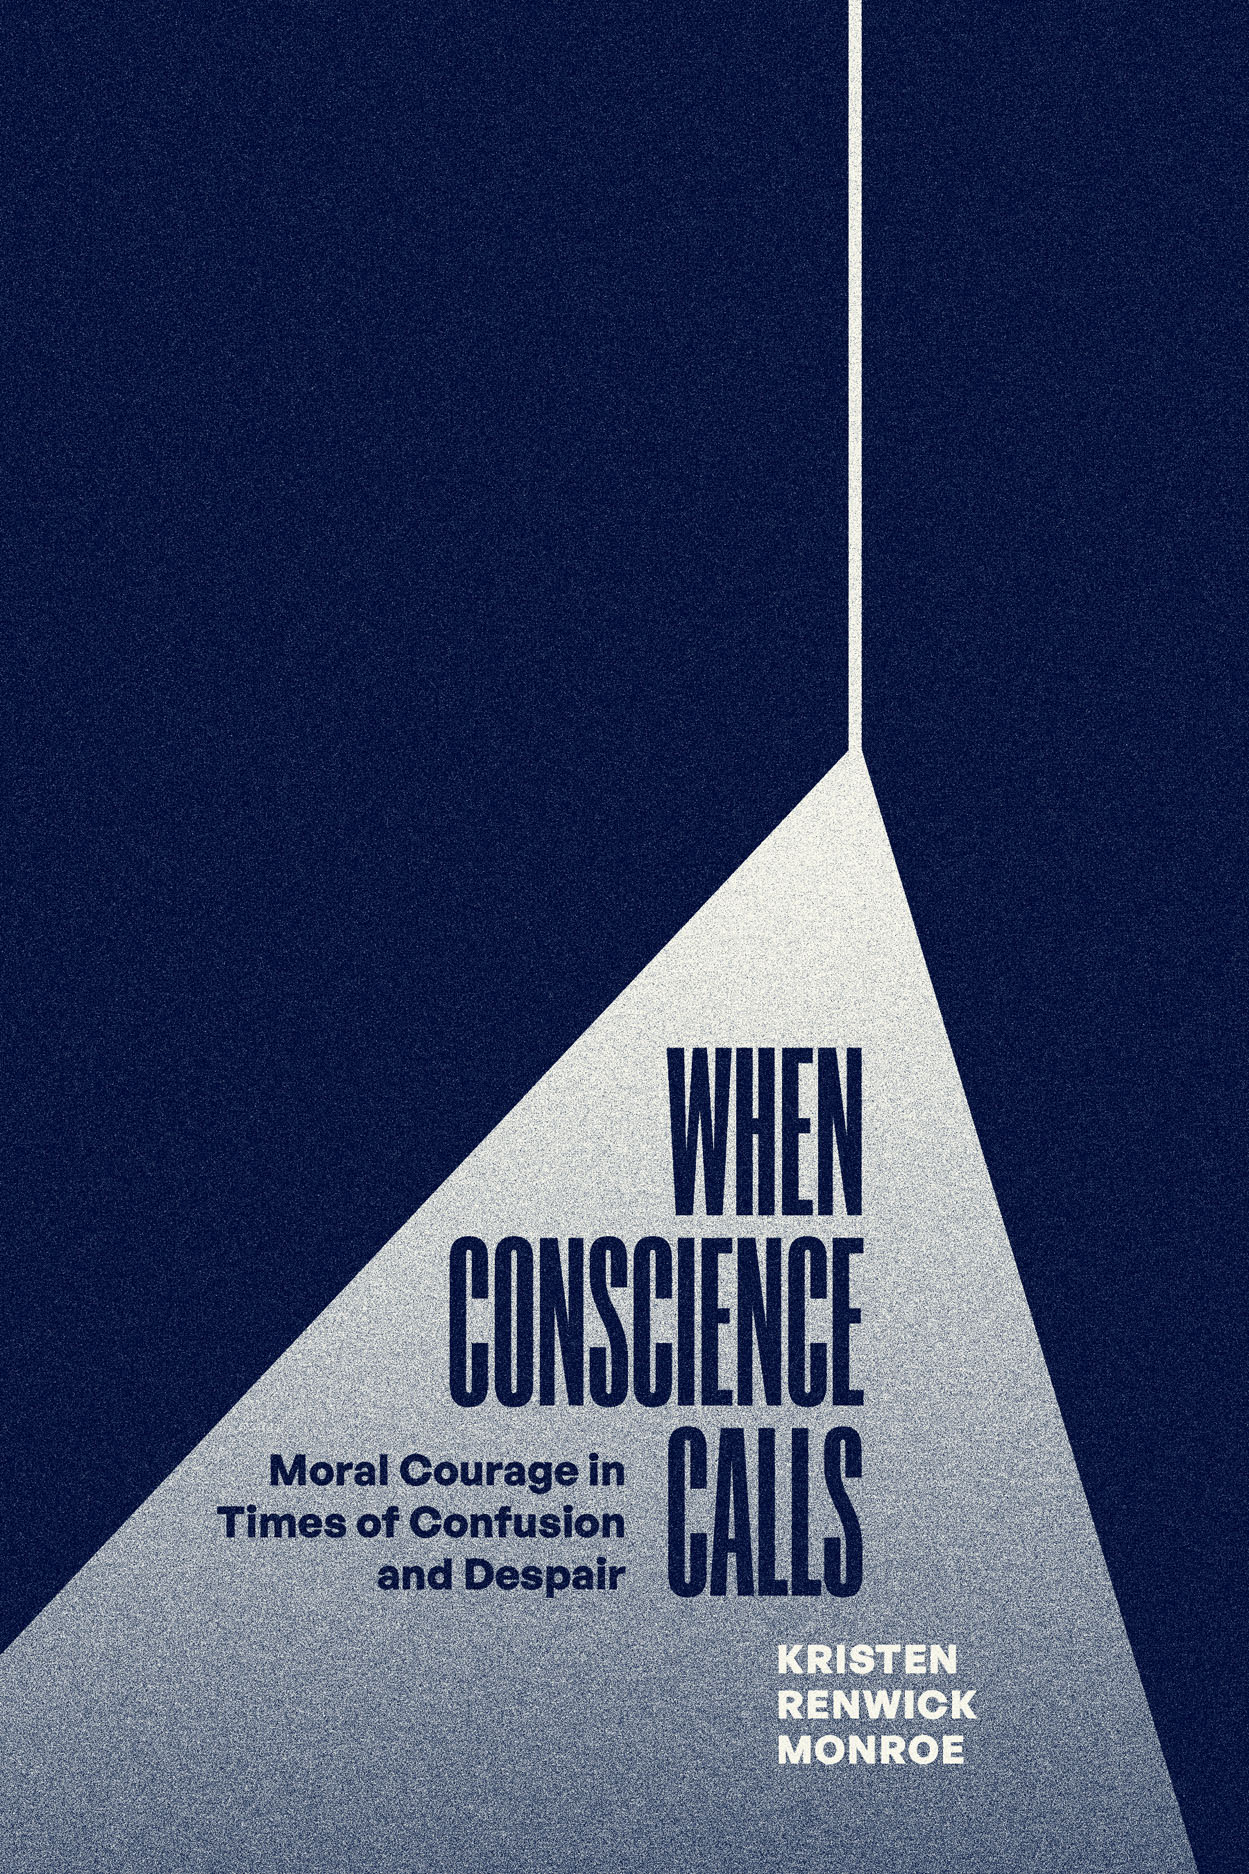 When Conscience Calls: Moral Courage in Times of Confusion and Despair,  Monroe